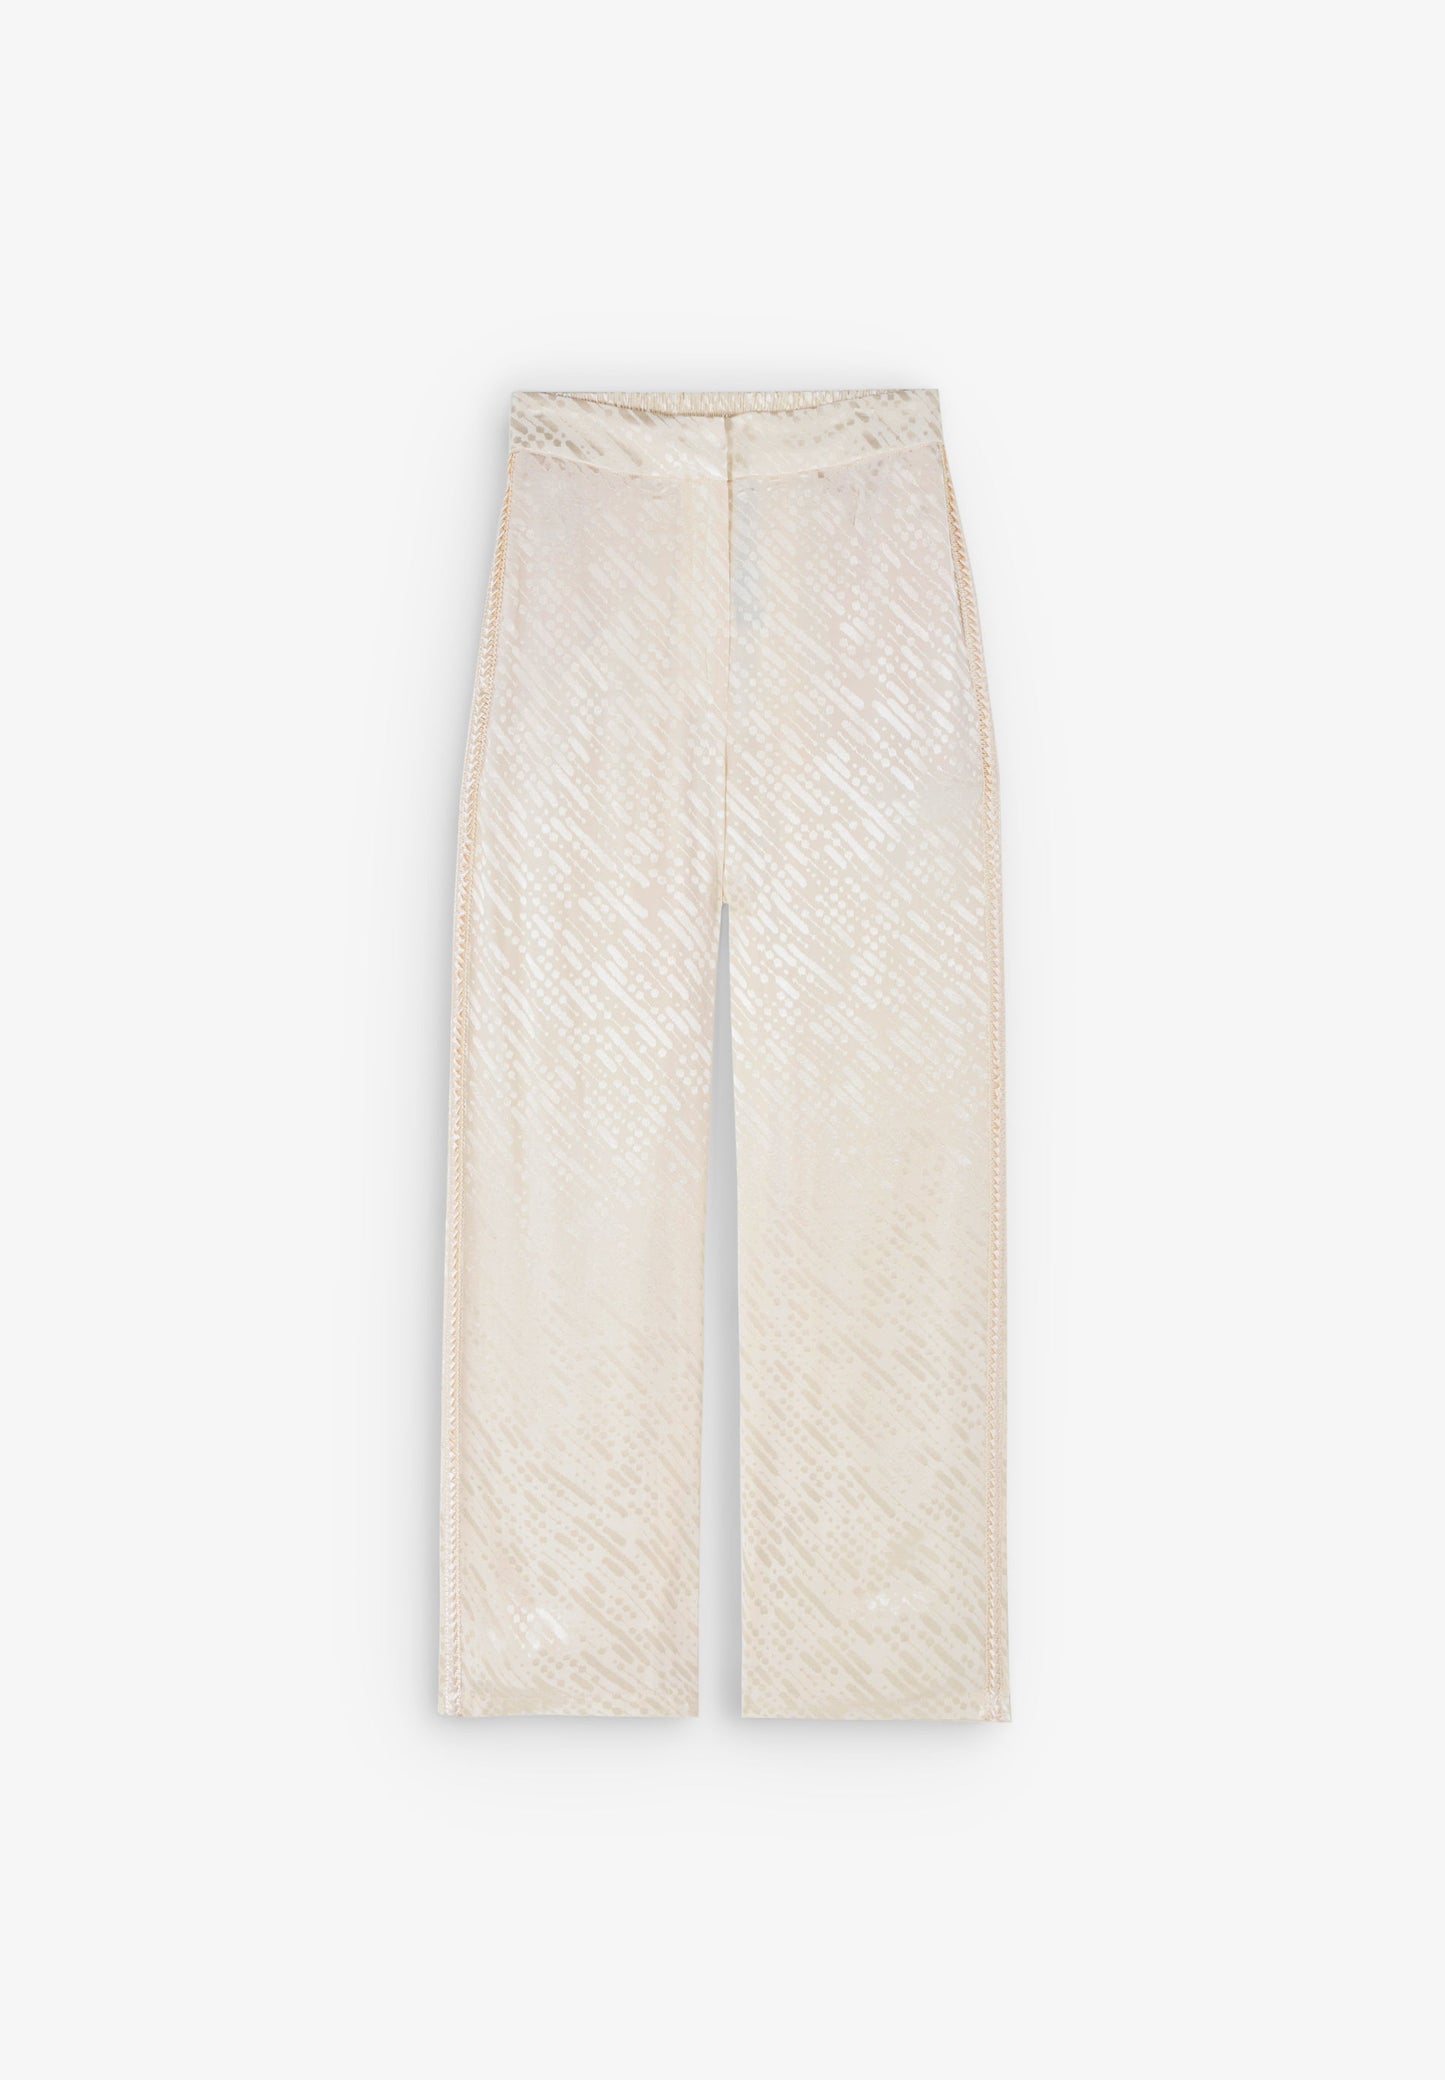 JACQUARD TROUSERS WITH METALLIC DETAILS